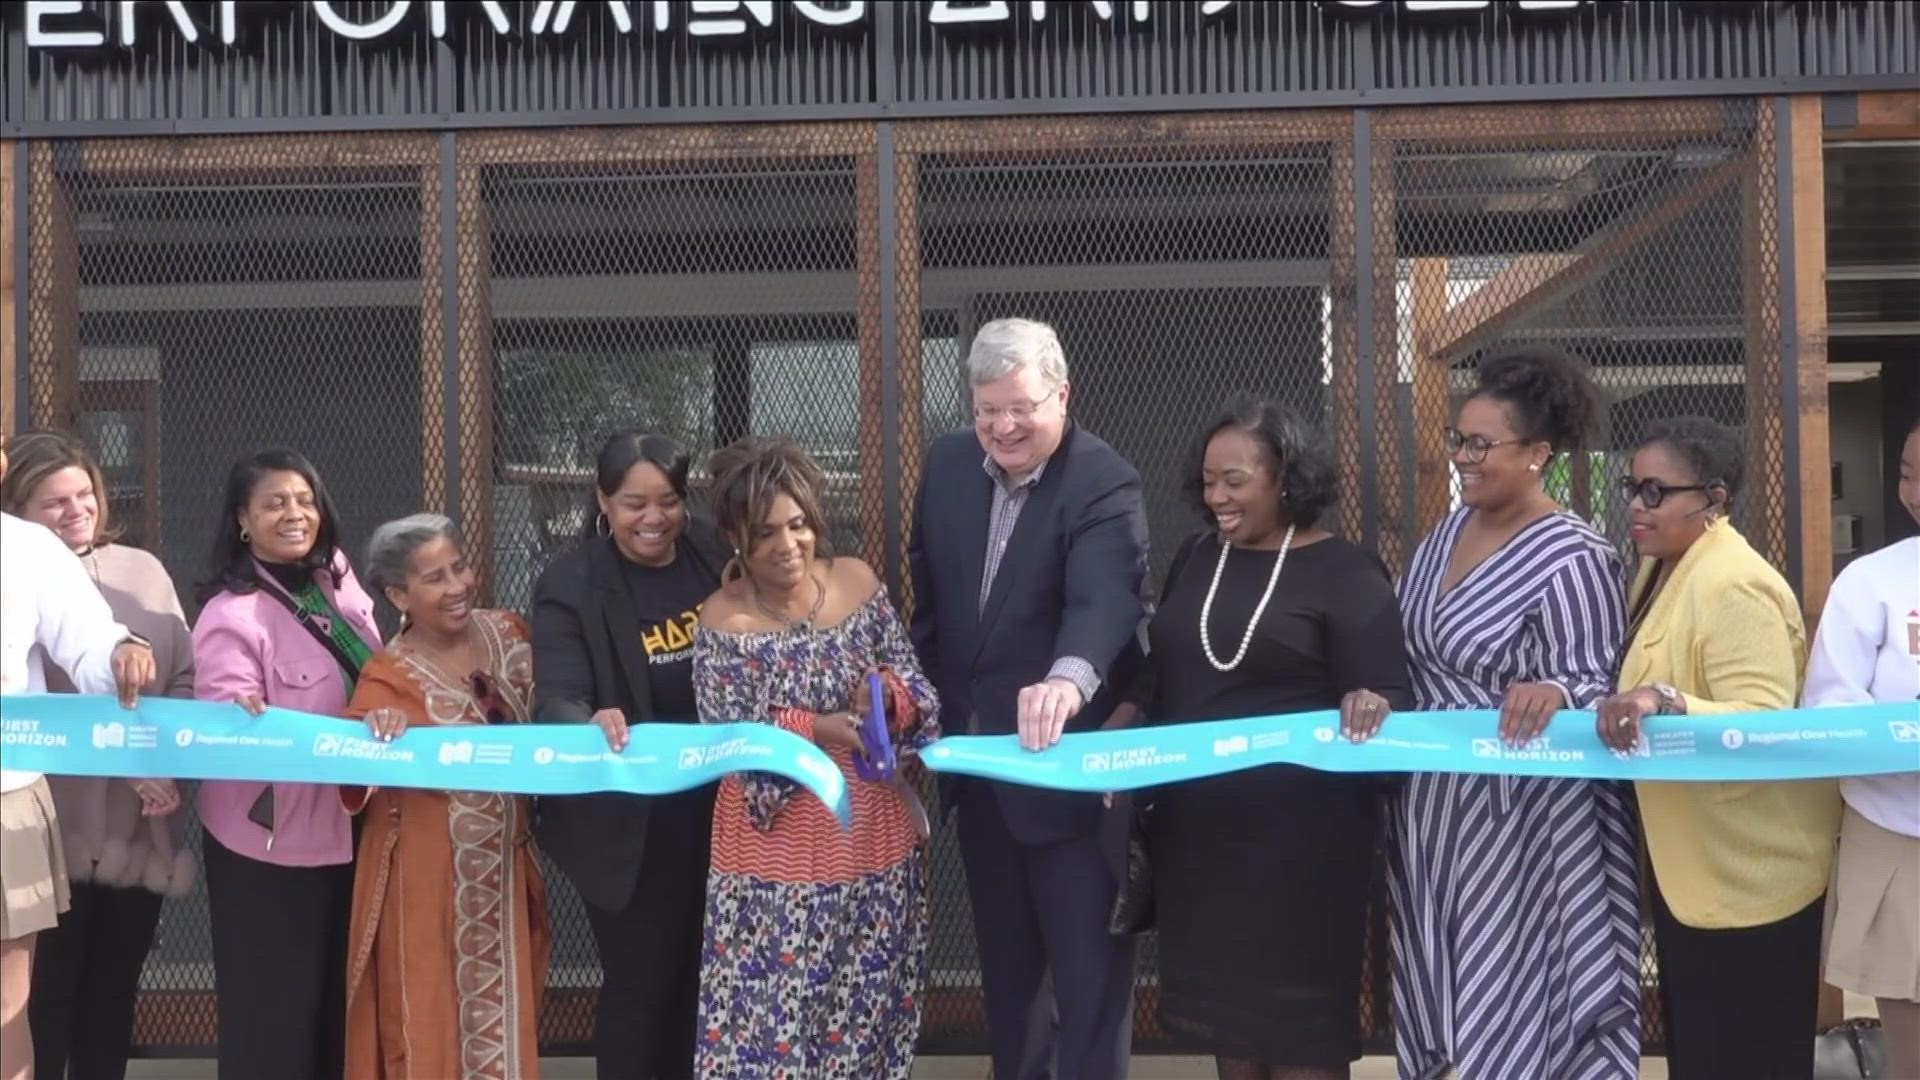 The grand re-opening served as a celebration of the organization's 32 years of service in the Memphis community. They hold an impressive 98 percent graduation rate.